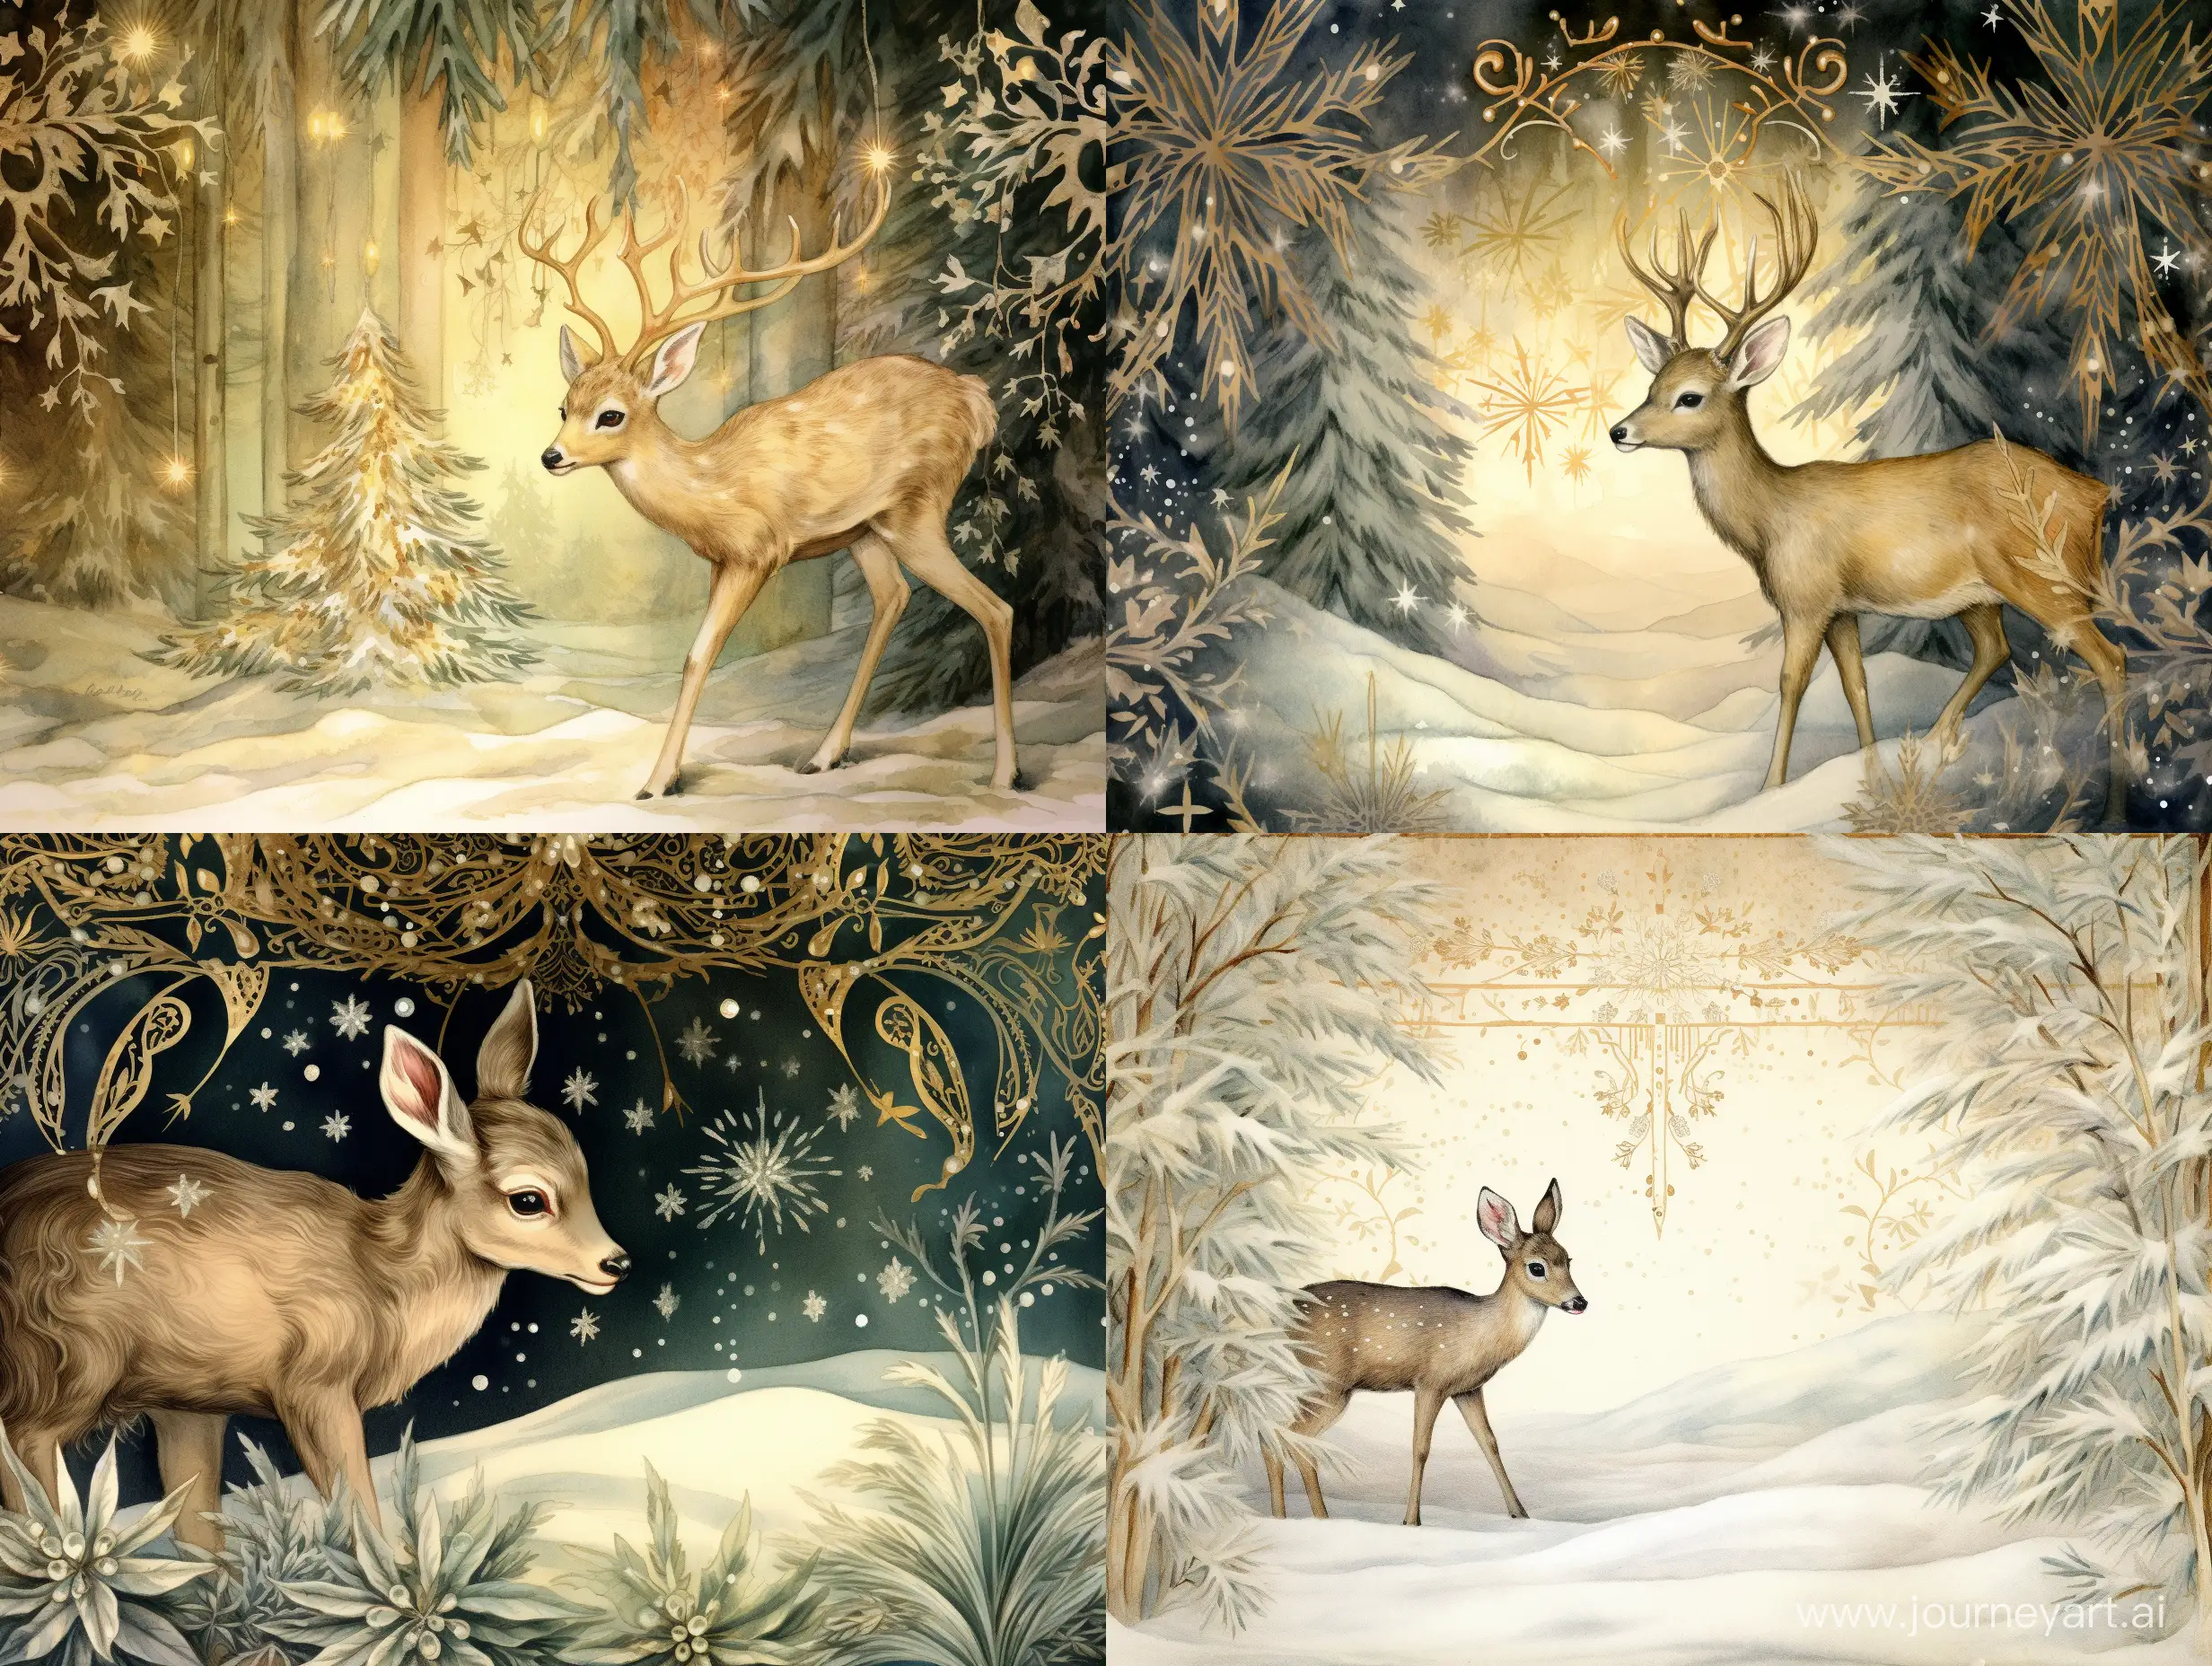 Fawn-Peekaboo-in-Snowdrift-Detailed-Fur-Rendering-and-Magical-Winter-Sparkles